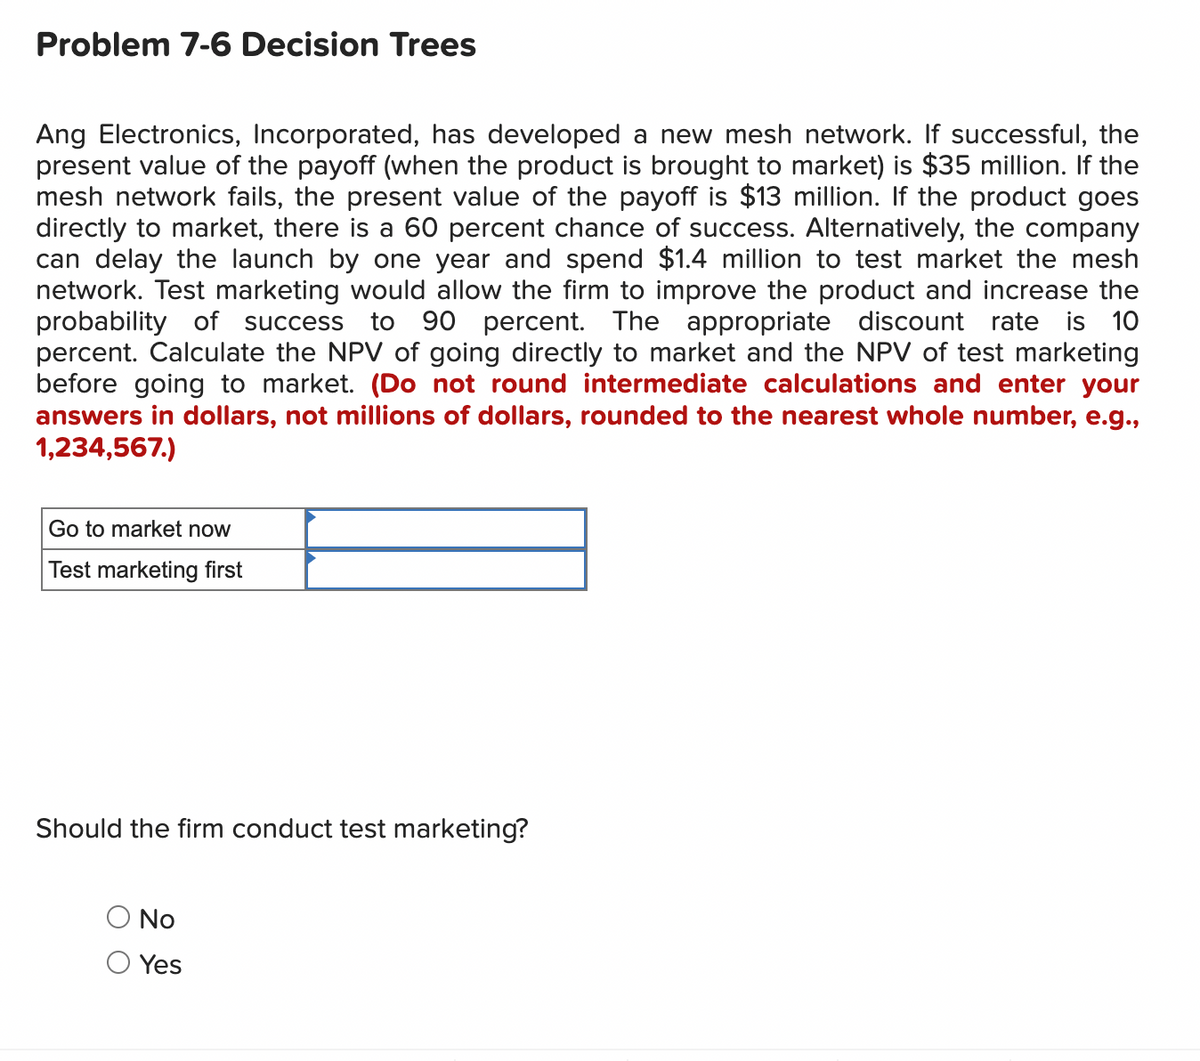 Problem 7-6 Decision Trees
Ang Electronics, Incorporated, has developed a new mesh network. If successful, the
present value of the payoff (when the product is brought to market) is $35 million. If the
mesh network fails, the present value of the payoff is $13 million. If the product goes
directly to market, there is a 60 percent chance of success. Alternatively, the company
can delay the launch by one year and spend $1.4 million to test market the mesh
network. Test marketing would allow the firm to improve the product and increase the
probability of success to 90 percent. The appropriate discount rate is 10
percent. Calculate the NPV of going directly to market and the NPV of test marketing
before going to market. (Do not round intermediate calculations and enter your
answers in dollars, not millions of dollars, rounded to the nearest whole number, e.g.,
1,234,567.)
Go to market now
Test marketing first
Should the firm conduct test marketing?
No
Yes